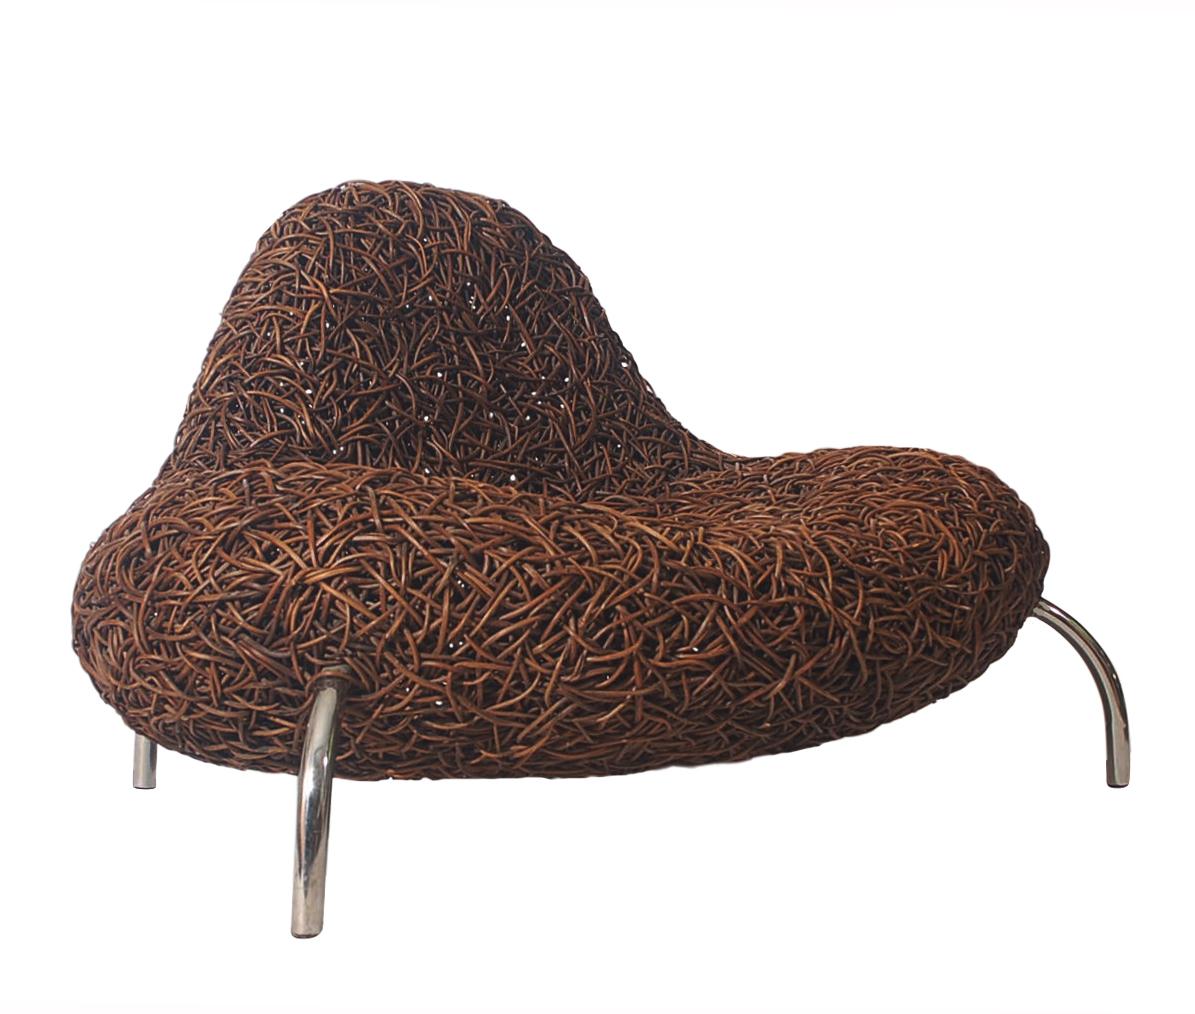 An incredibly unique design in organic rattan by Udom Udomsrianan and produced by Planet 2001. Consists of woven jungle vines with stainless steel legs. Out of production with limited number produced. Manufacture label.